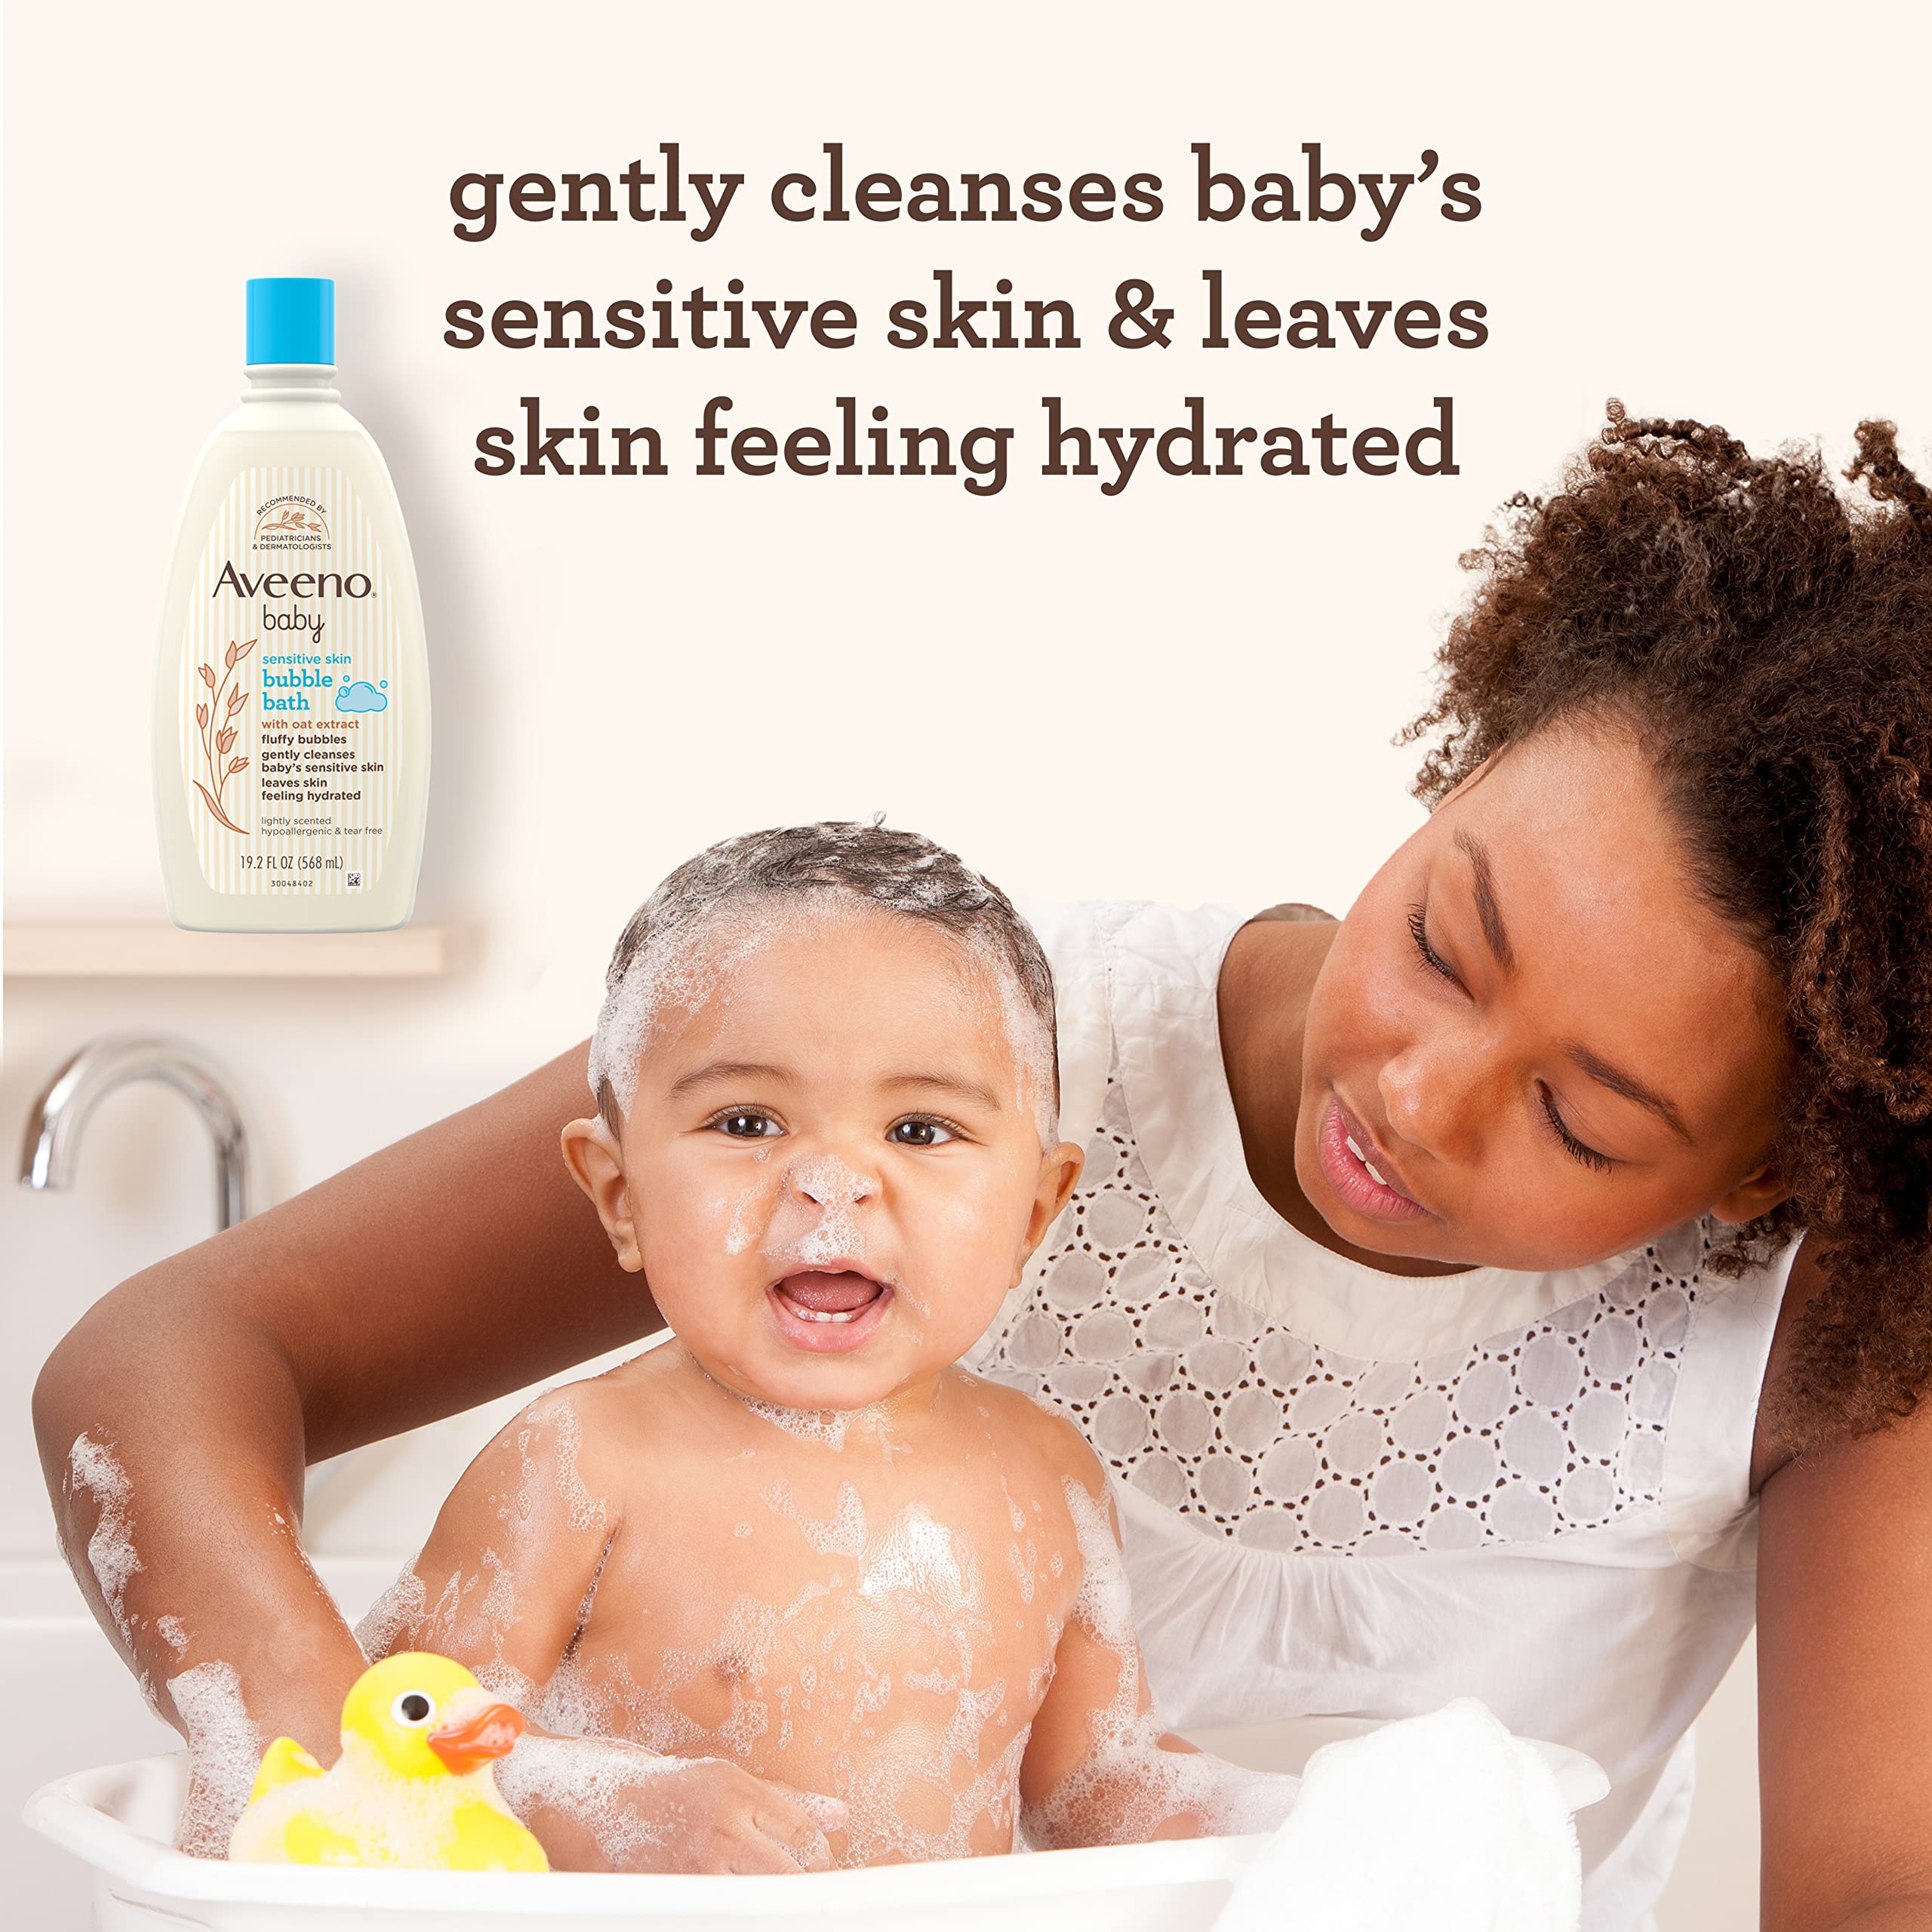 Aveeno Baby Sensitive Skin Bubble Bath with Oat Extract, Gently Cleanses and Leaves Skin Feeling Hydrated, Tear-Free Formula, Hypoallergenic, Paraben-, Phthalate-, Soap- & Dye-Free, 19.2 fl. Oz